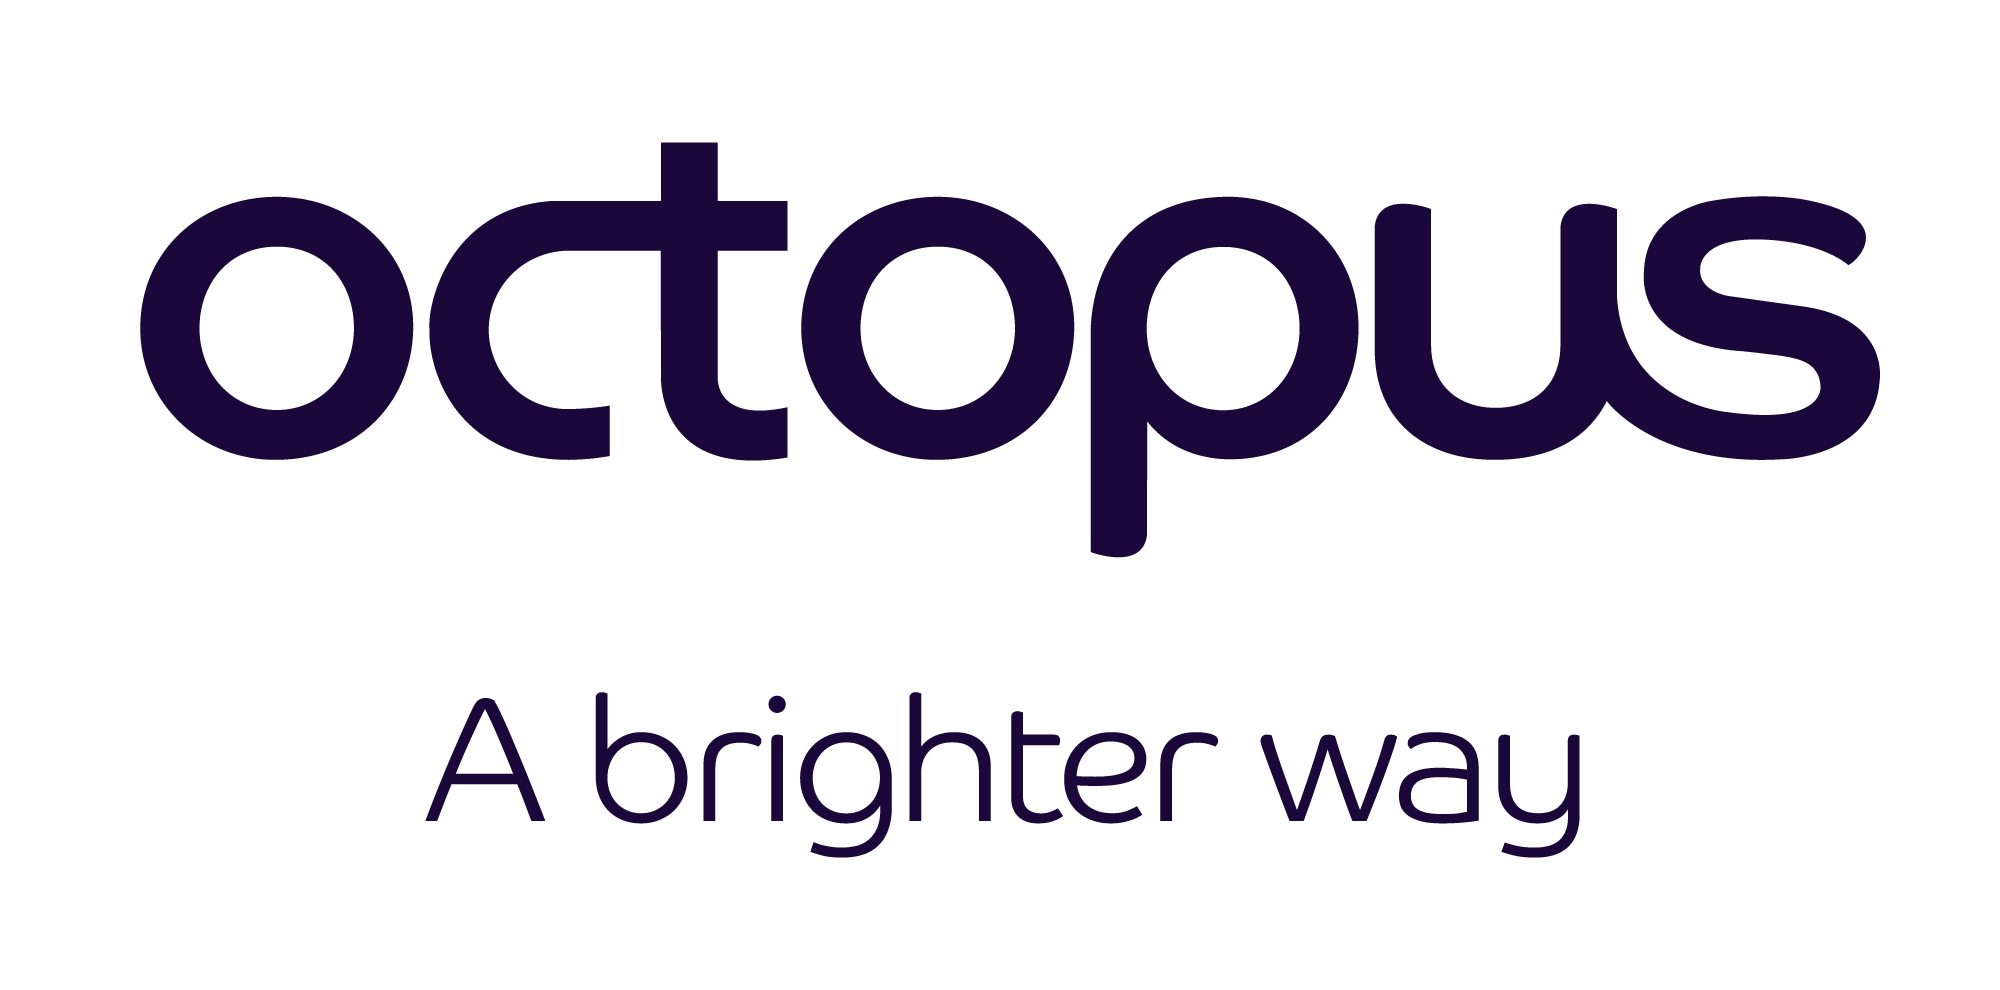 Octopus logo - this links to the Octopus Investments website